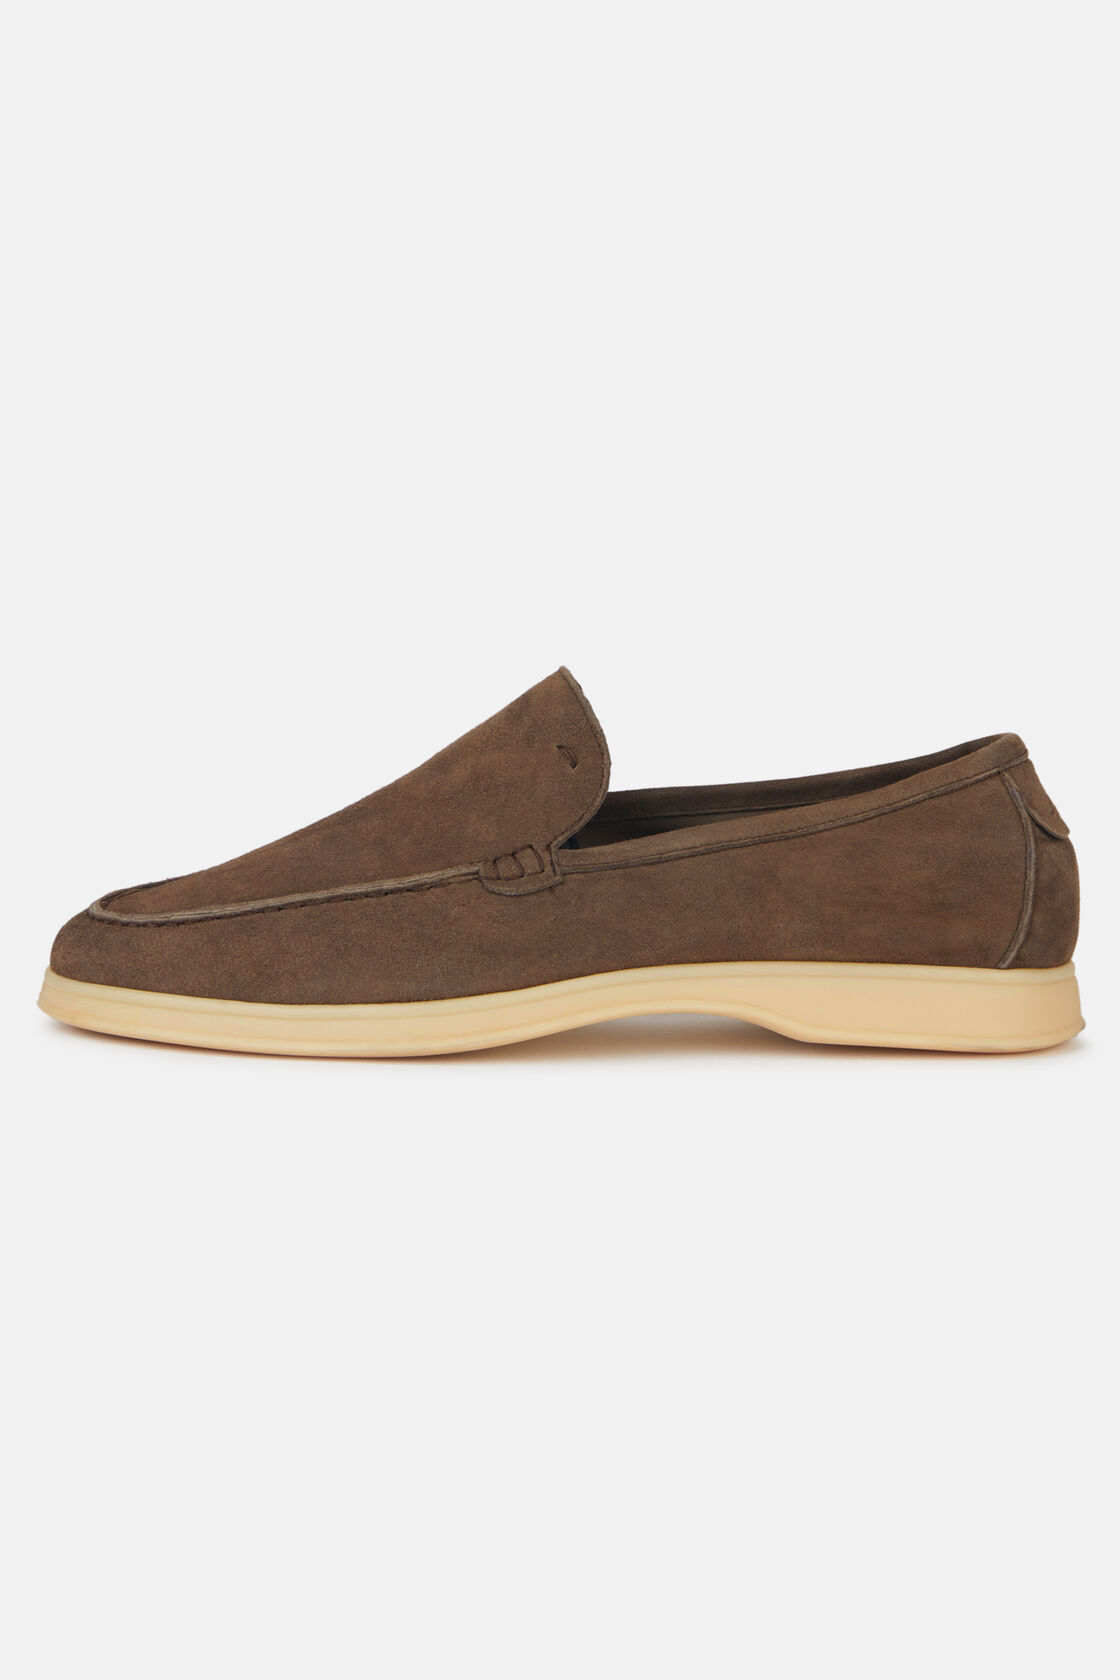 Aria Suede Loafers, Brown, hi-res